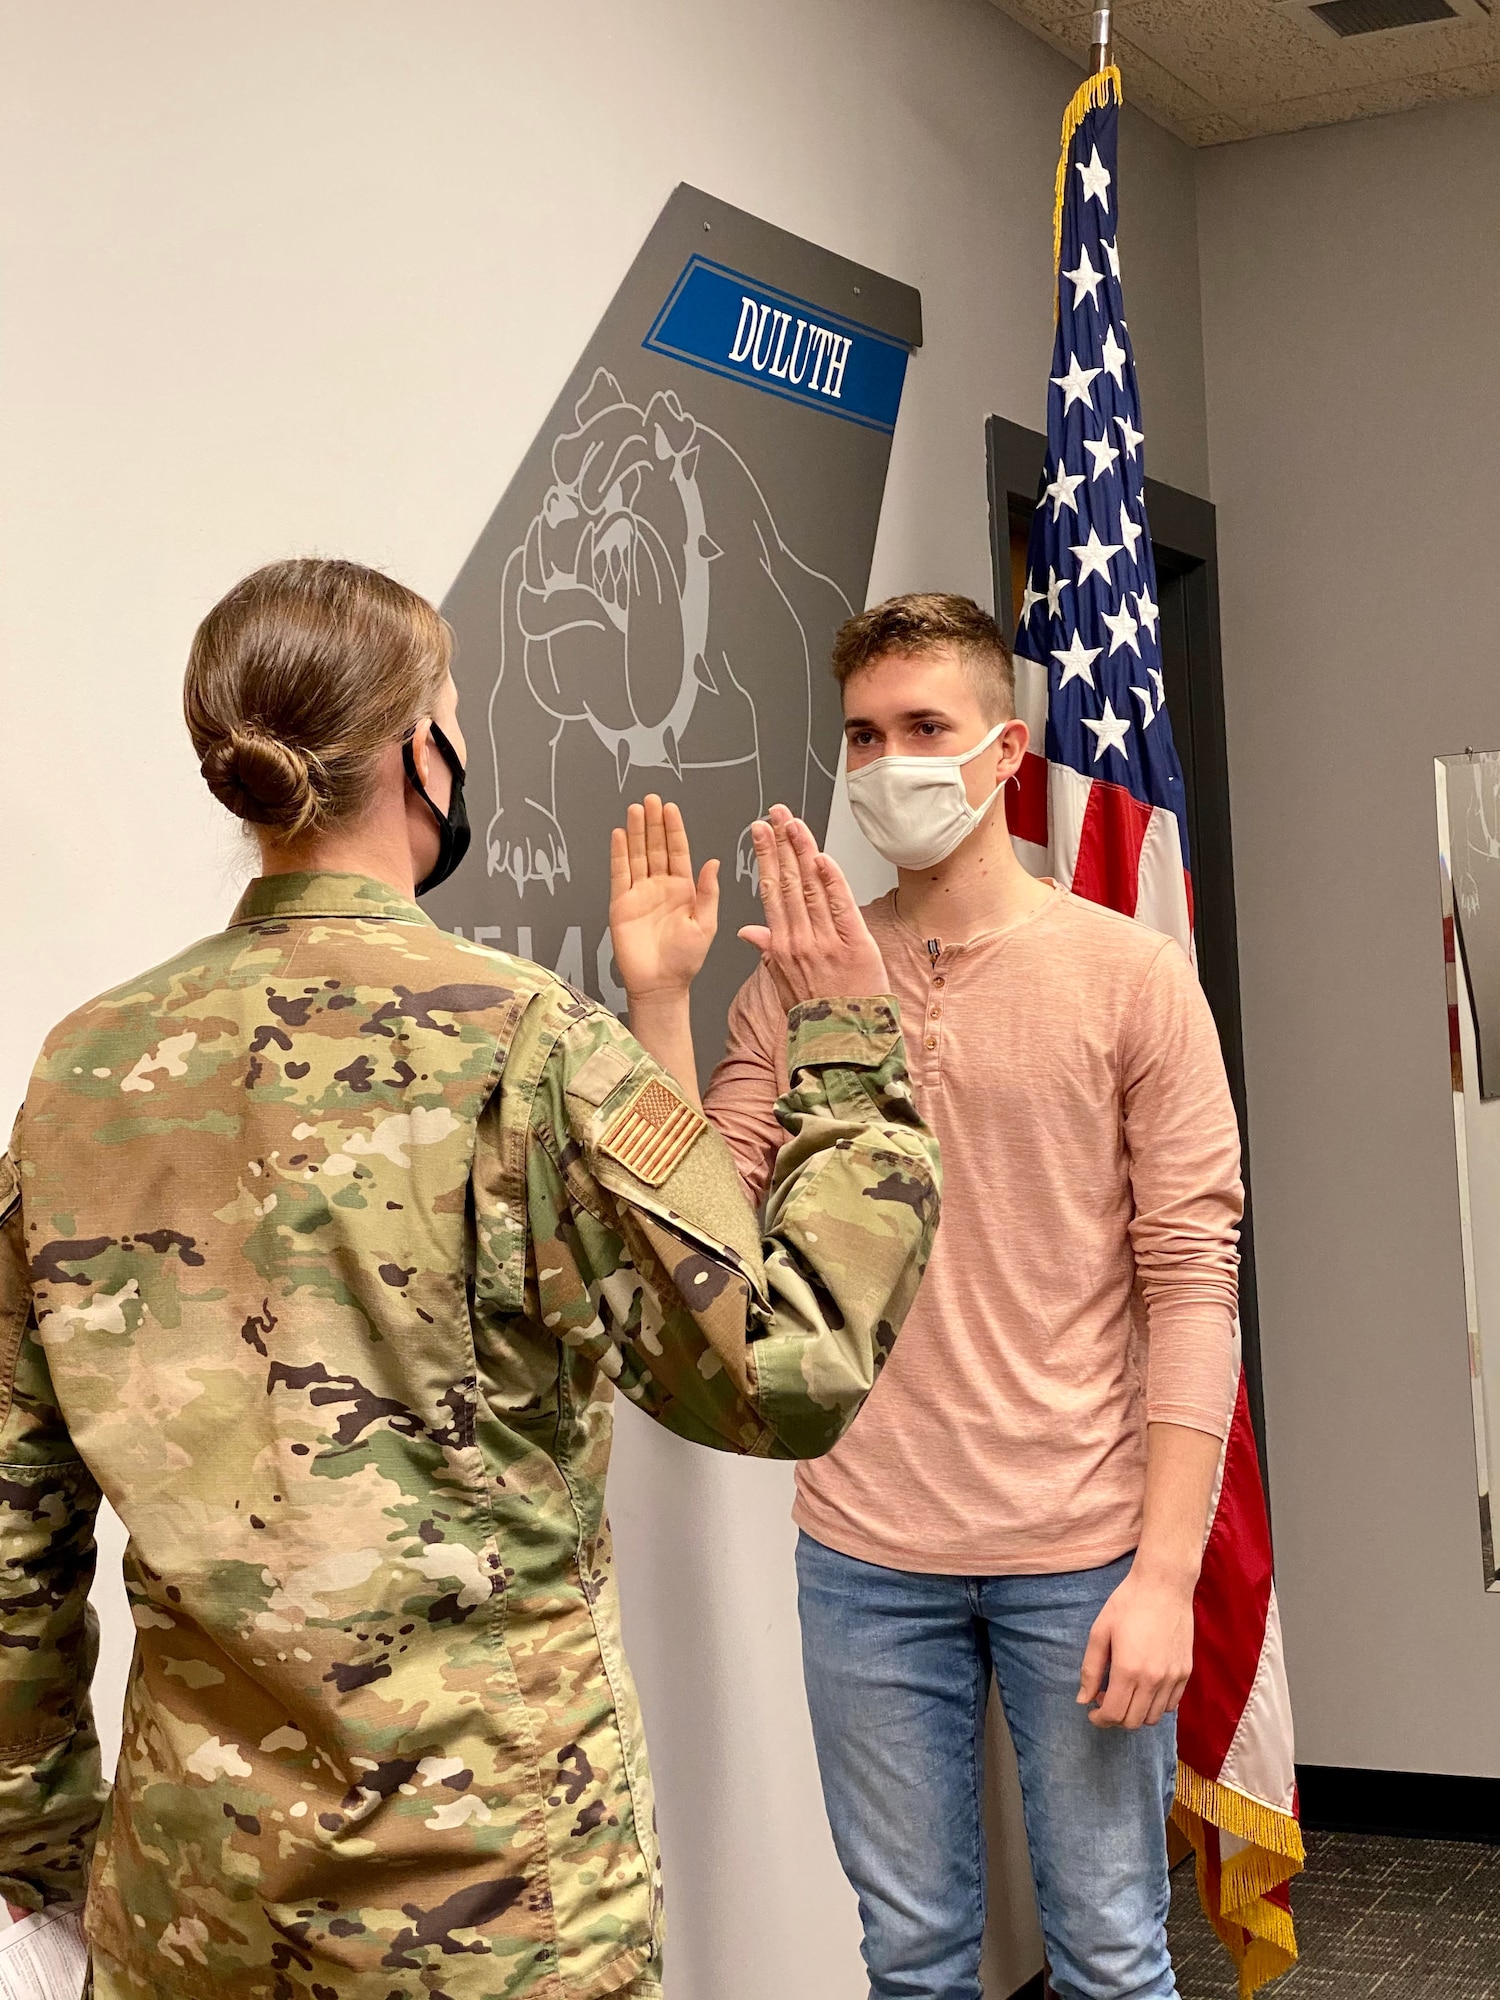 Capt. Mylii Pukema administers the Oath of Office to her nephew, Joey Gigliotti on March 15, 2021. Gigliotti is the third generation of his family to serve at the 148th Fighter Wing, Minnesota Air National Guard. (U.S. Air National Guard photo by Audra Flanagan)